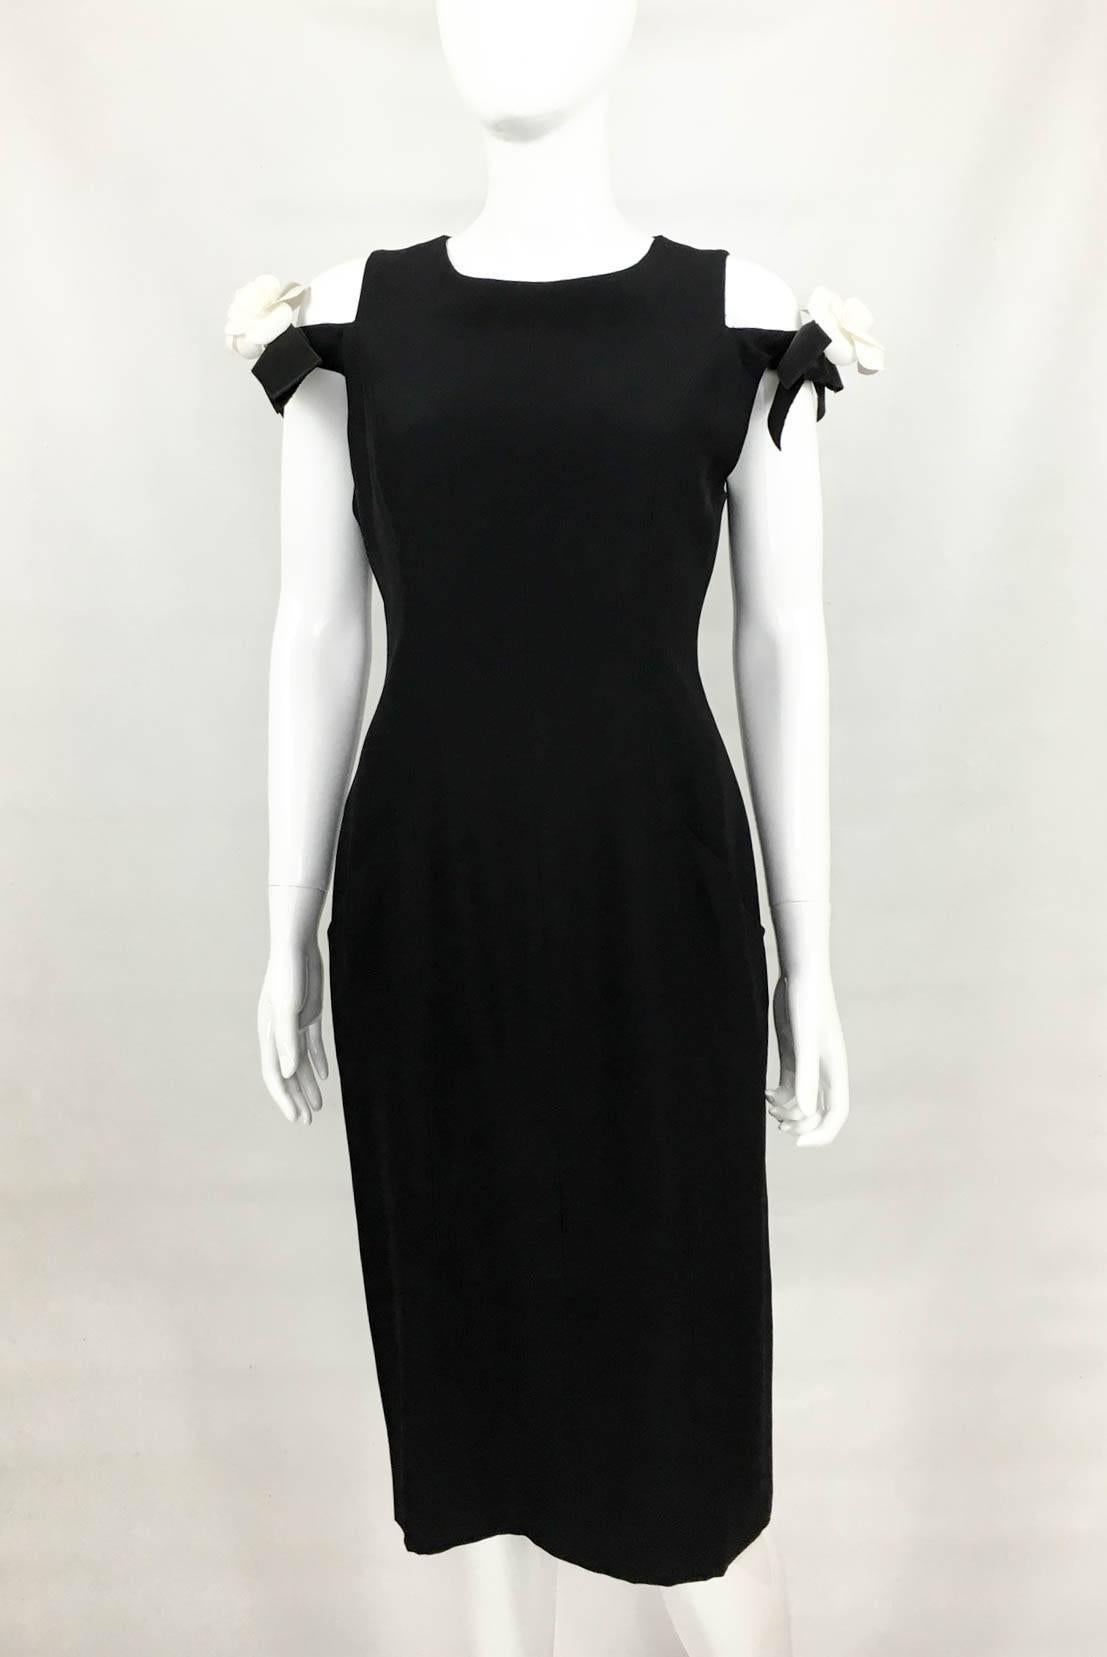 Chanel Black Silk Dress With Detachable Silk Camellias - 1990s

Vintage Chanel Silk Black Dress With Detachable Silk Camellias. Absolutely fabulous little black dress by Chanel. Made in Silk Crepe, it features bows off the shoulders on either